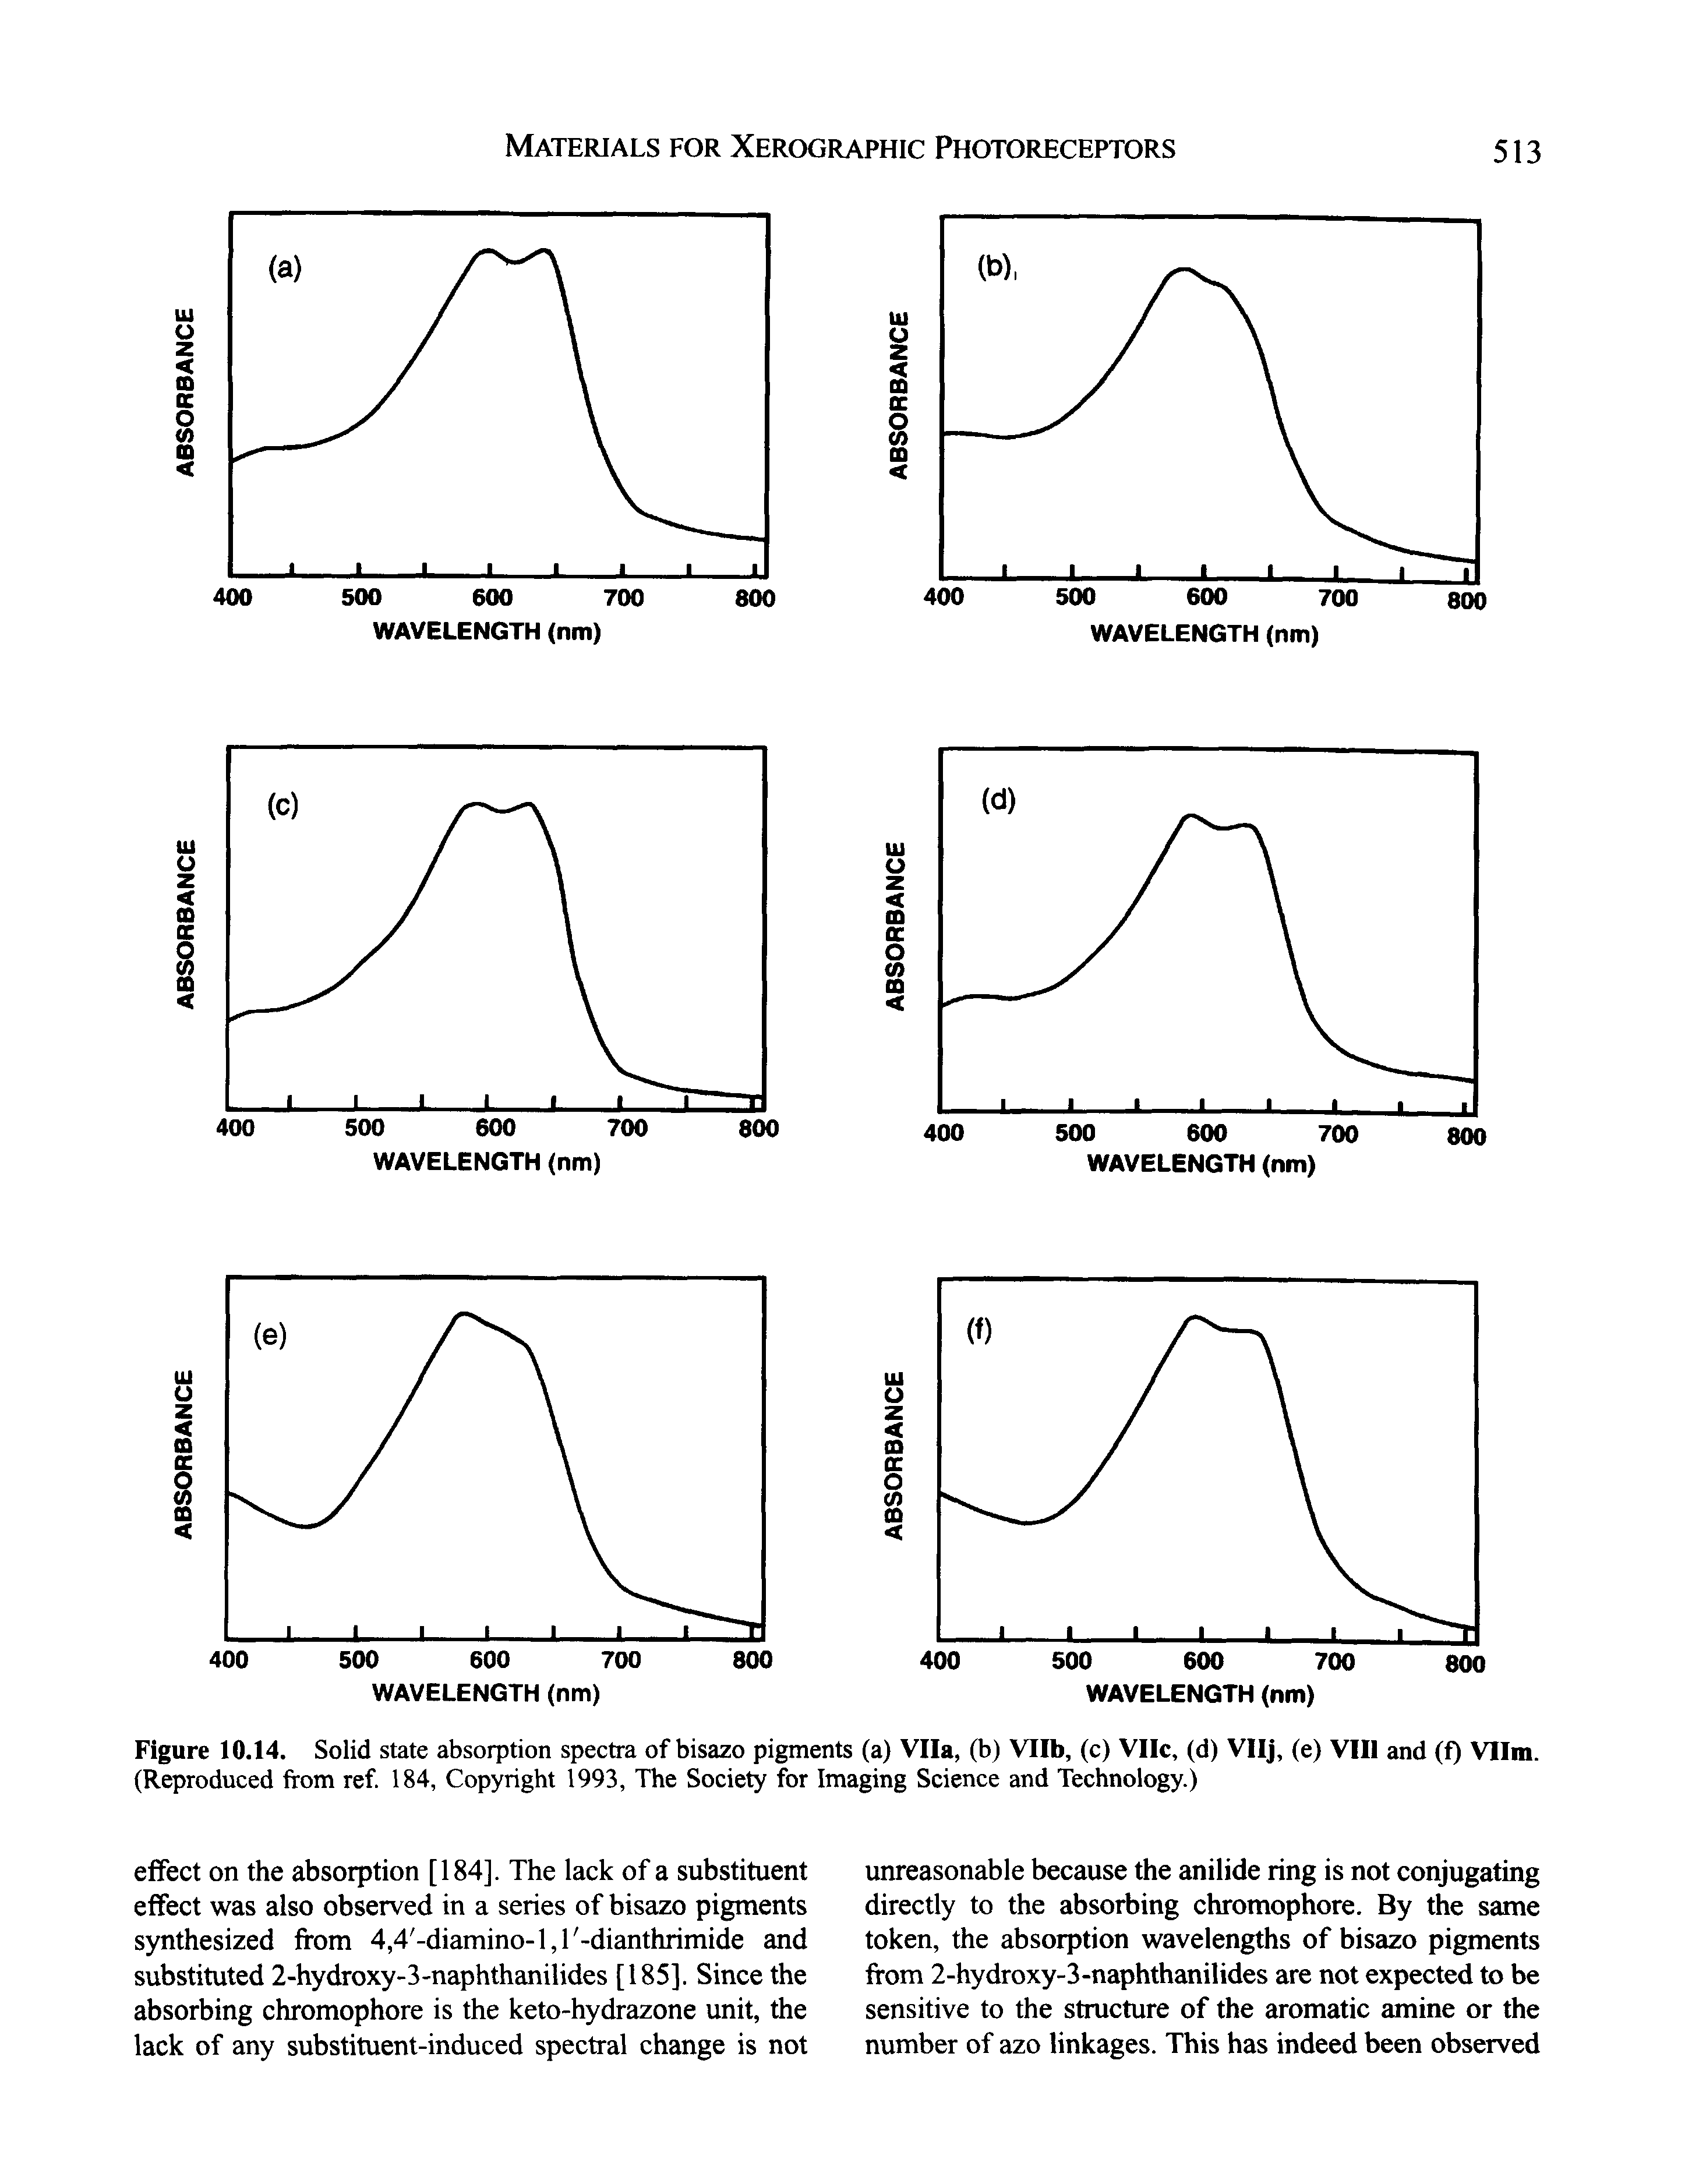 Figure 10.14. Solid state absorption spectra of bisazo pigments (a) Vila, (b) Vllb, (c) VIIc, (d) Vllj, (e) VIII and (f) Vllm. (Reproduced from ref. 184, Copyright 1993, The Society for Imaging Science and Technology.)...